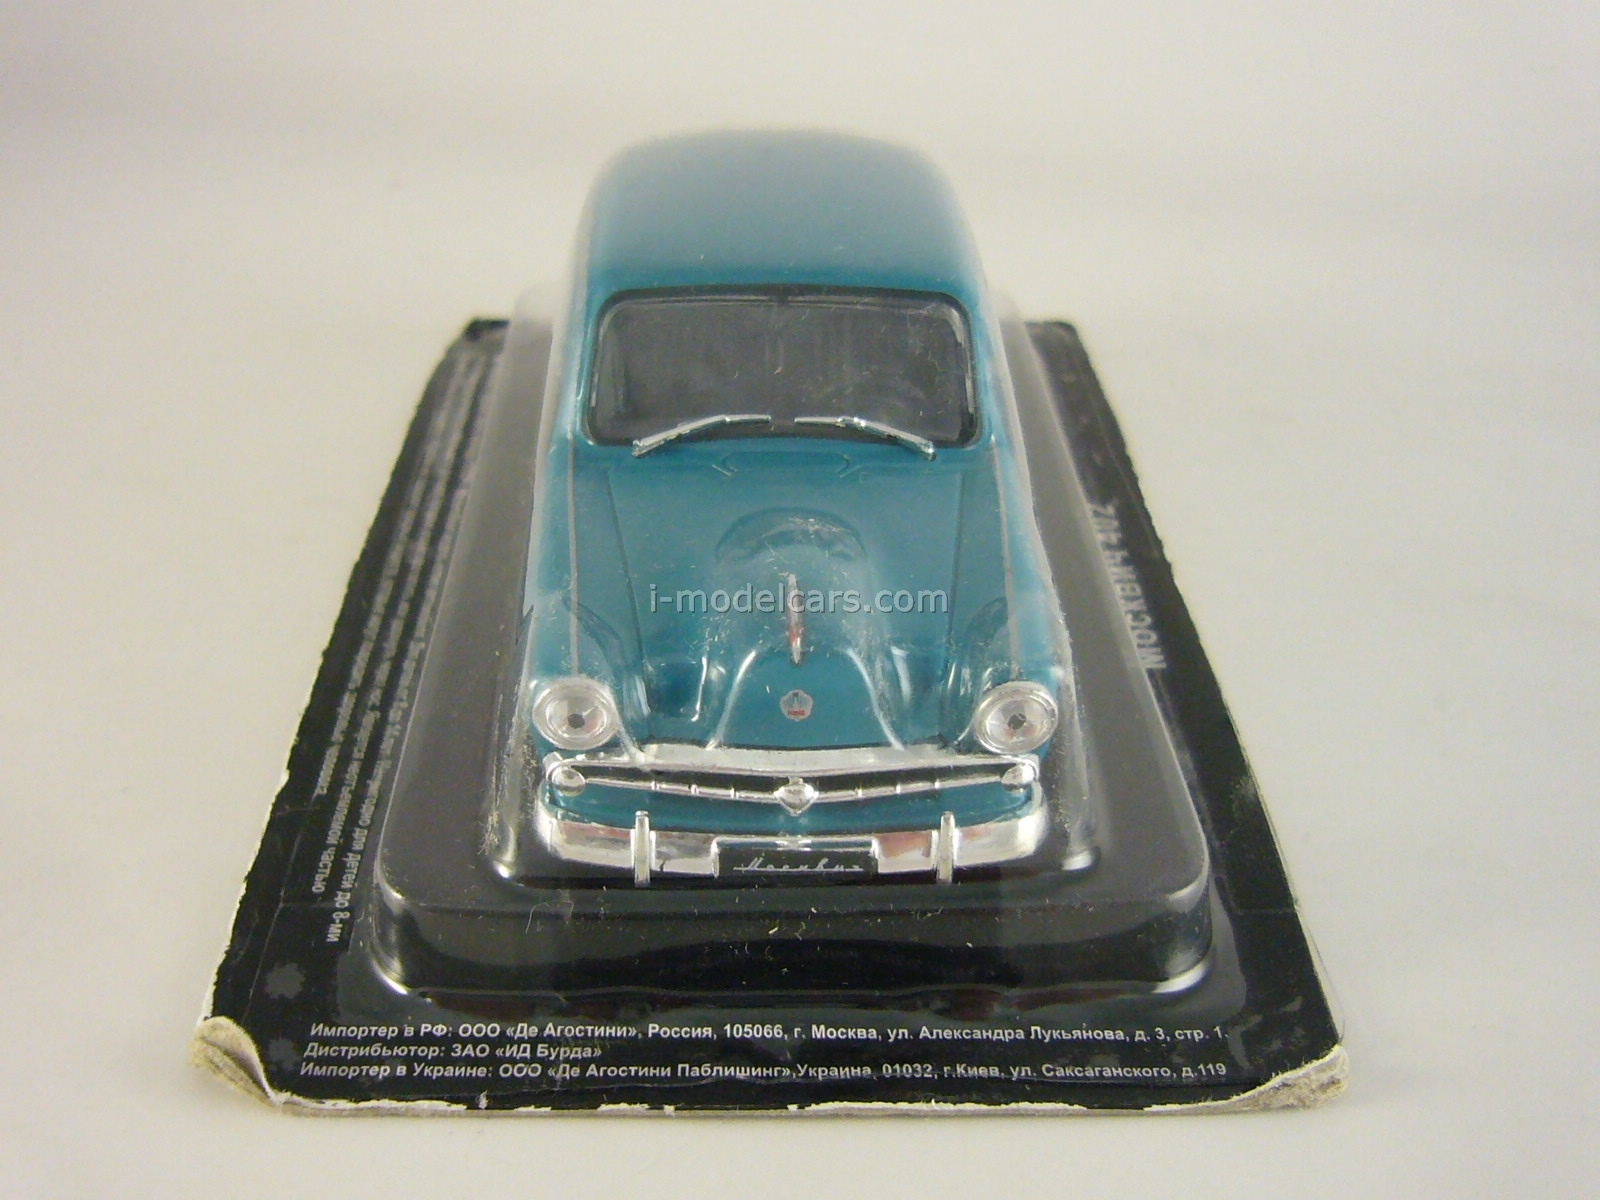 Moskvich-402 journal autolegends of USSR the best Scale car 1:43